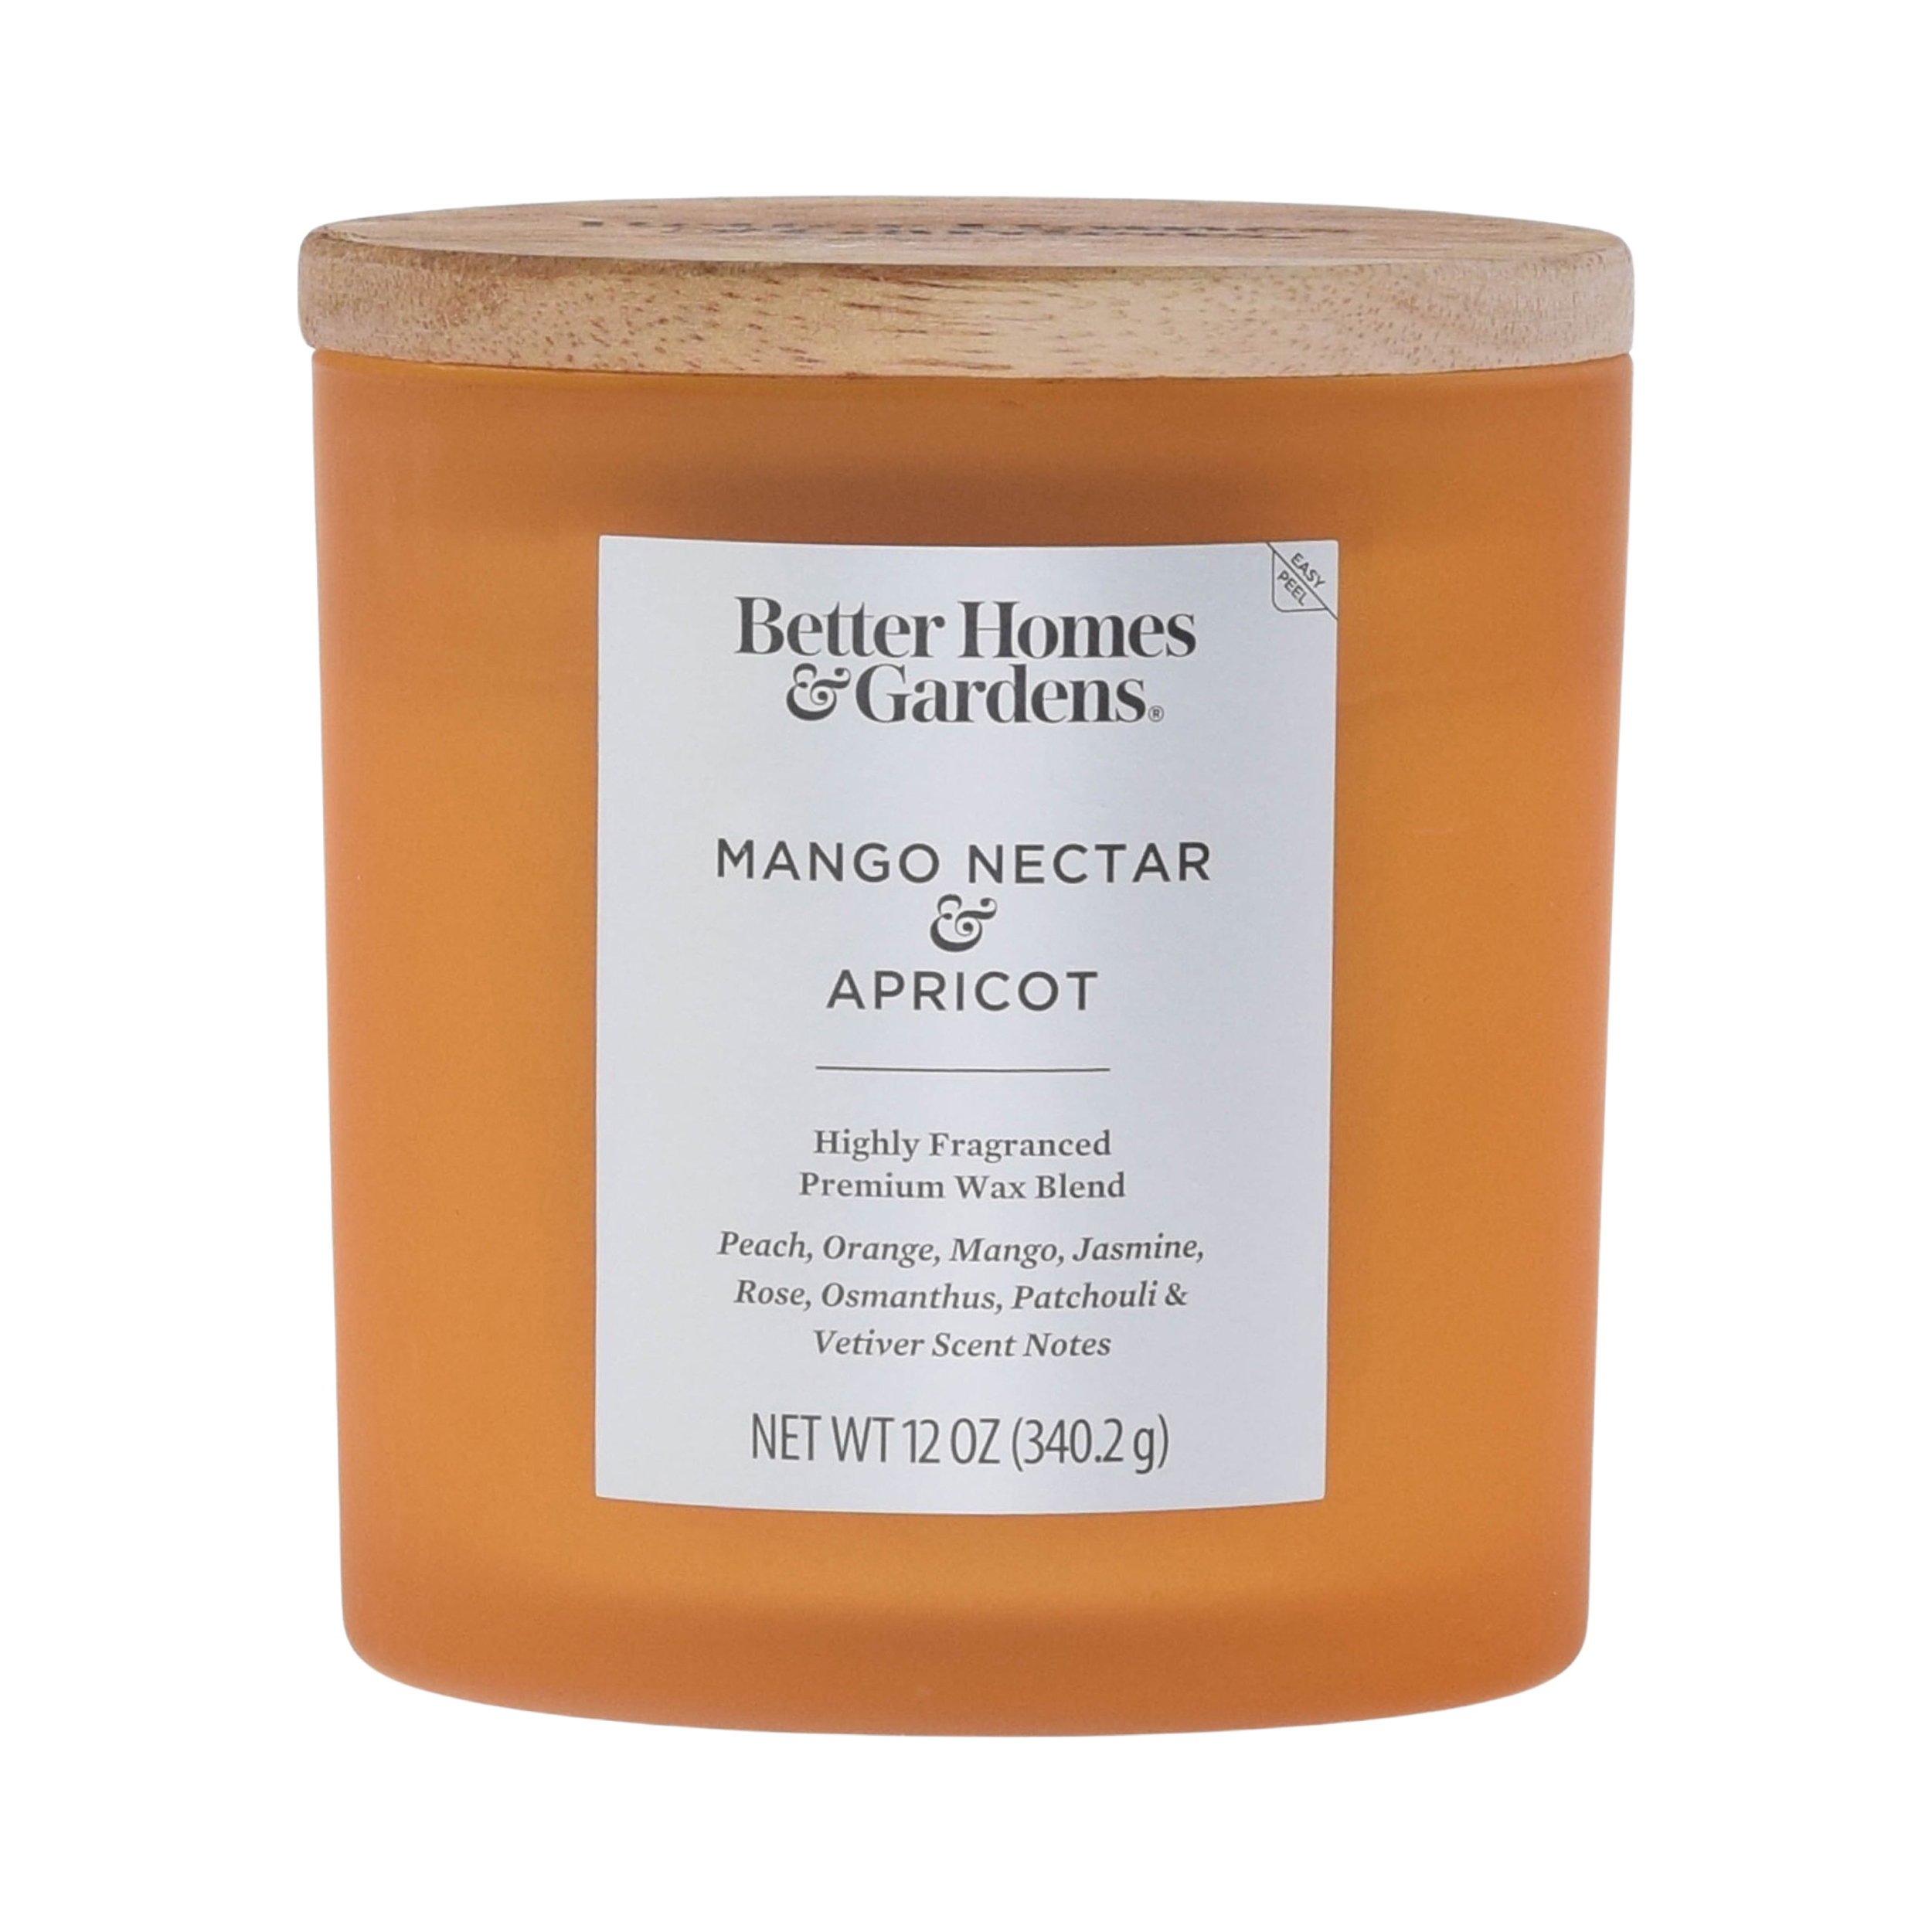 Better Homes & Gardens 12oz Mango Nectar & Apricot Scented 2-Wick Frosted Jar Candle - image 1 of 5